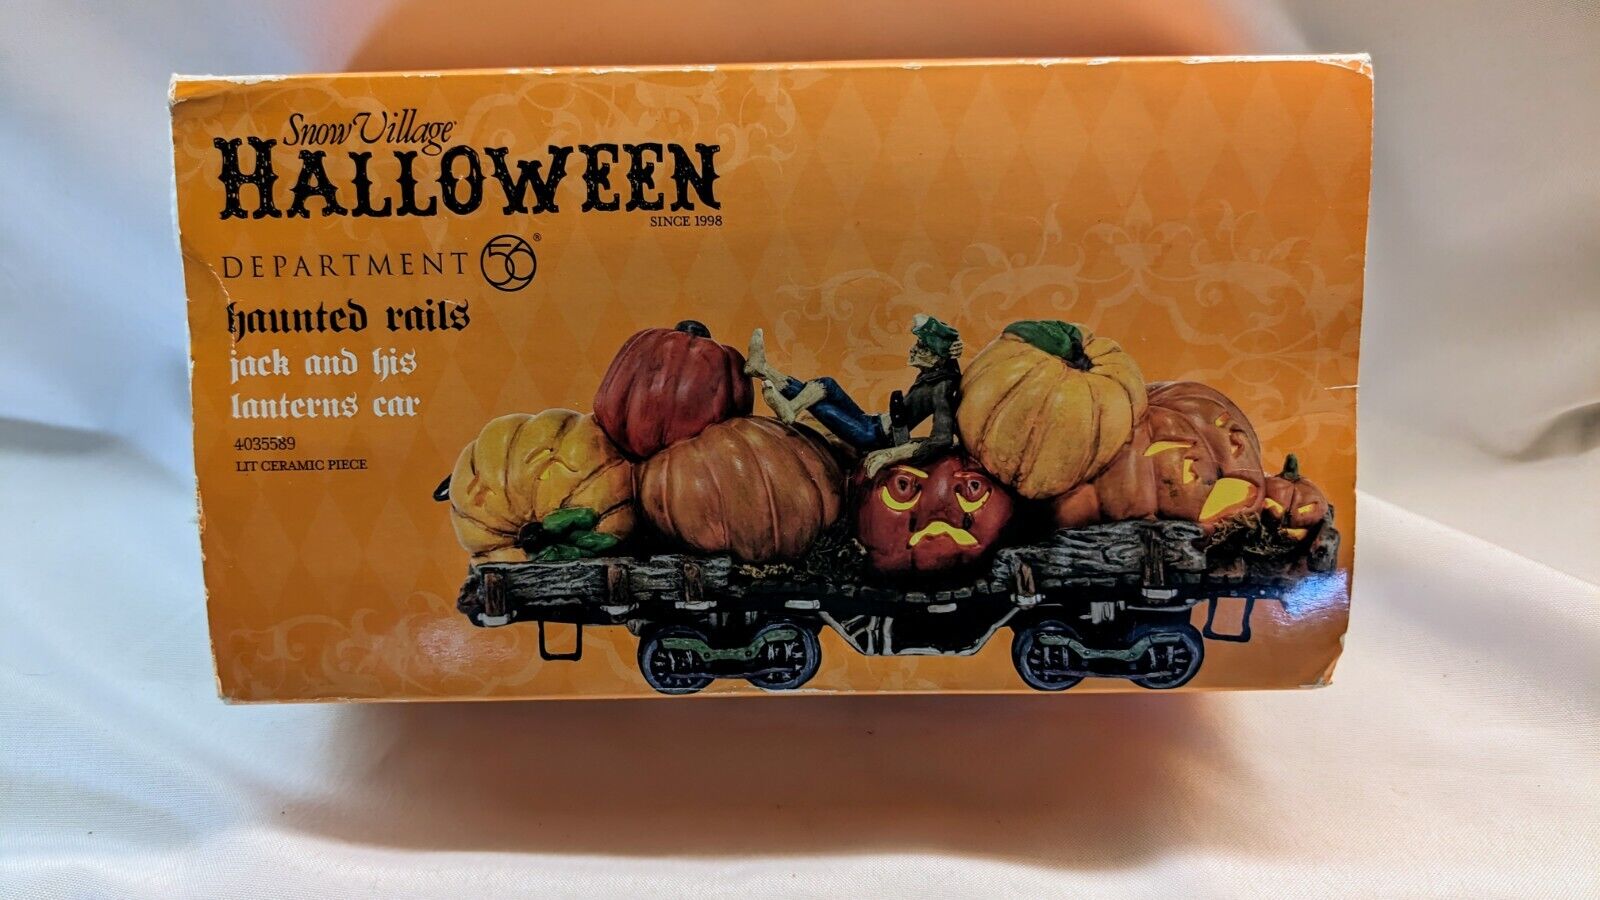 Dept 56 Halloween~Haunted Rails Jack and His Lanterns Car #4035589 Used? 